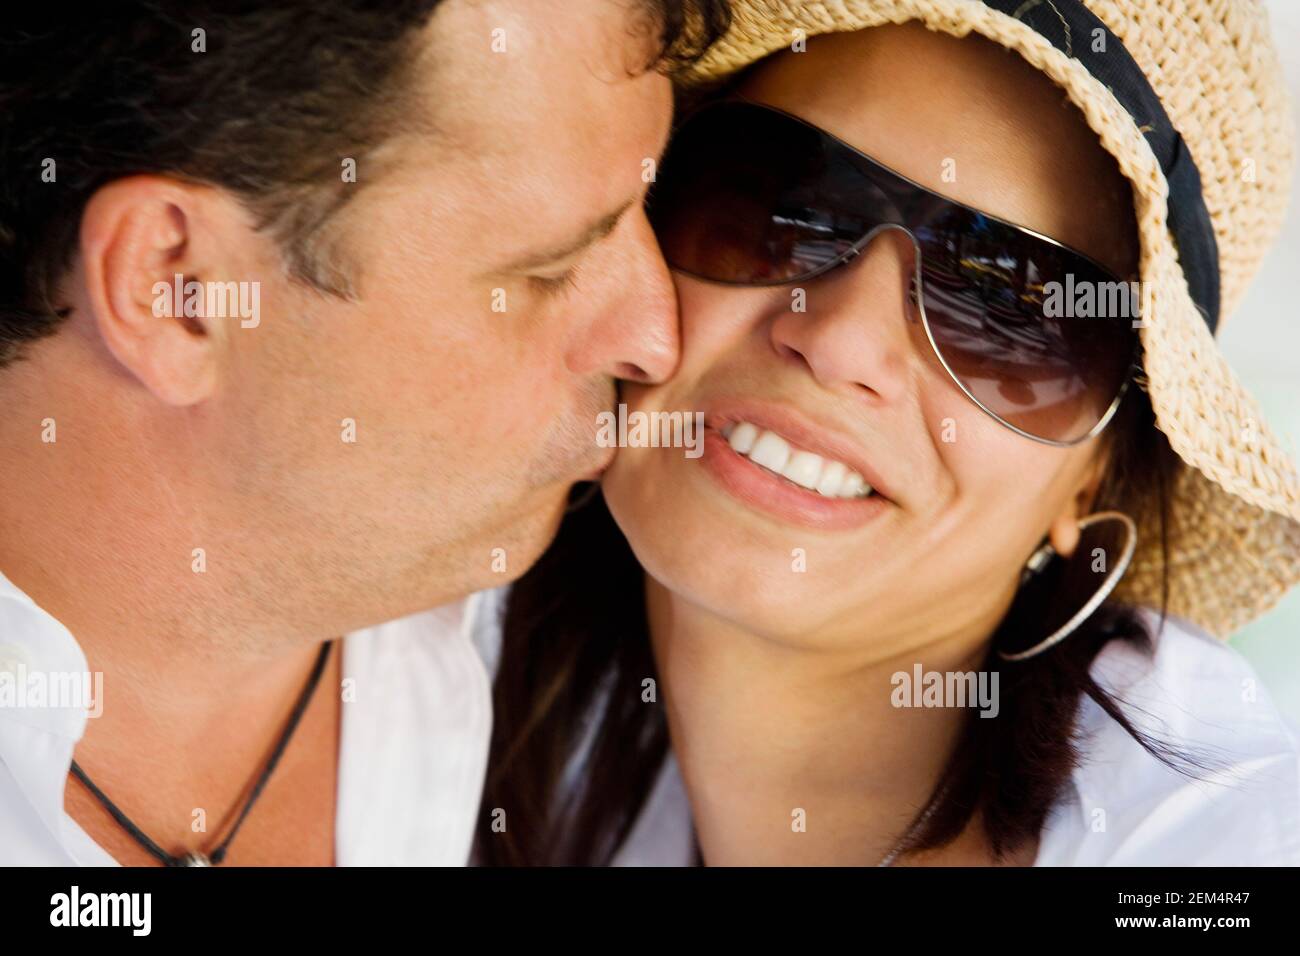 Close-up of a mid adult man kissing a mid adult woman's on the cheek Stock Photo